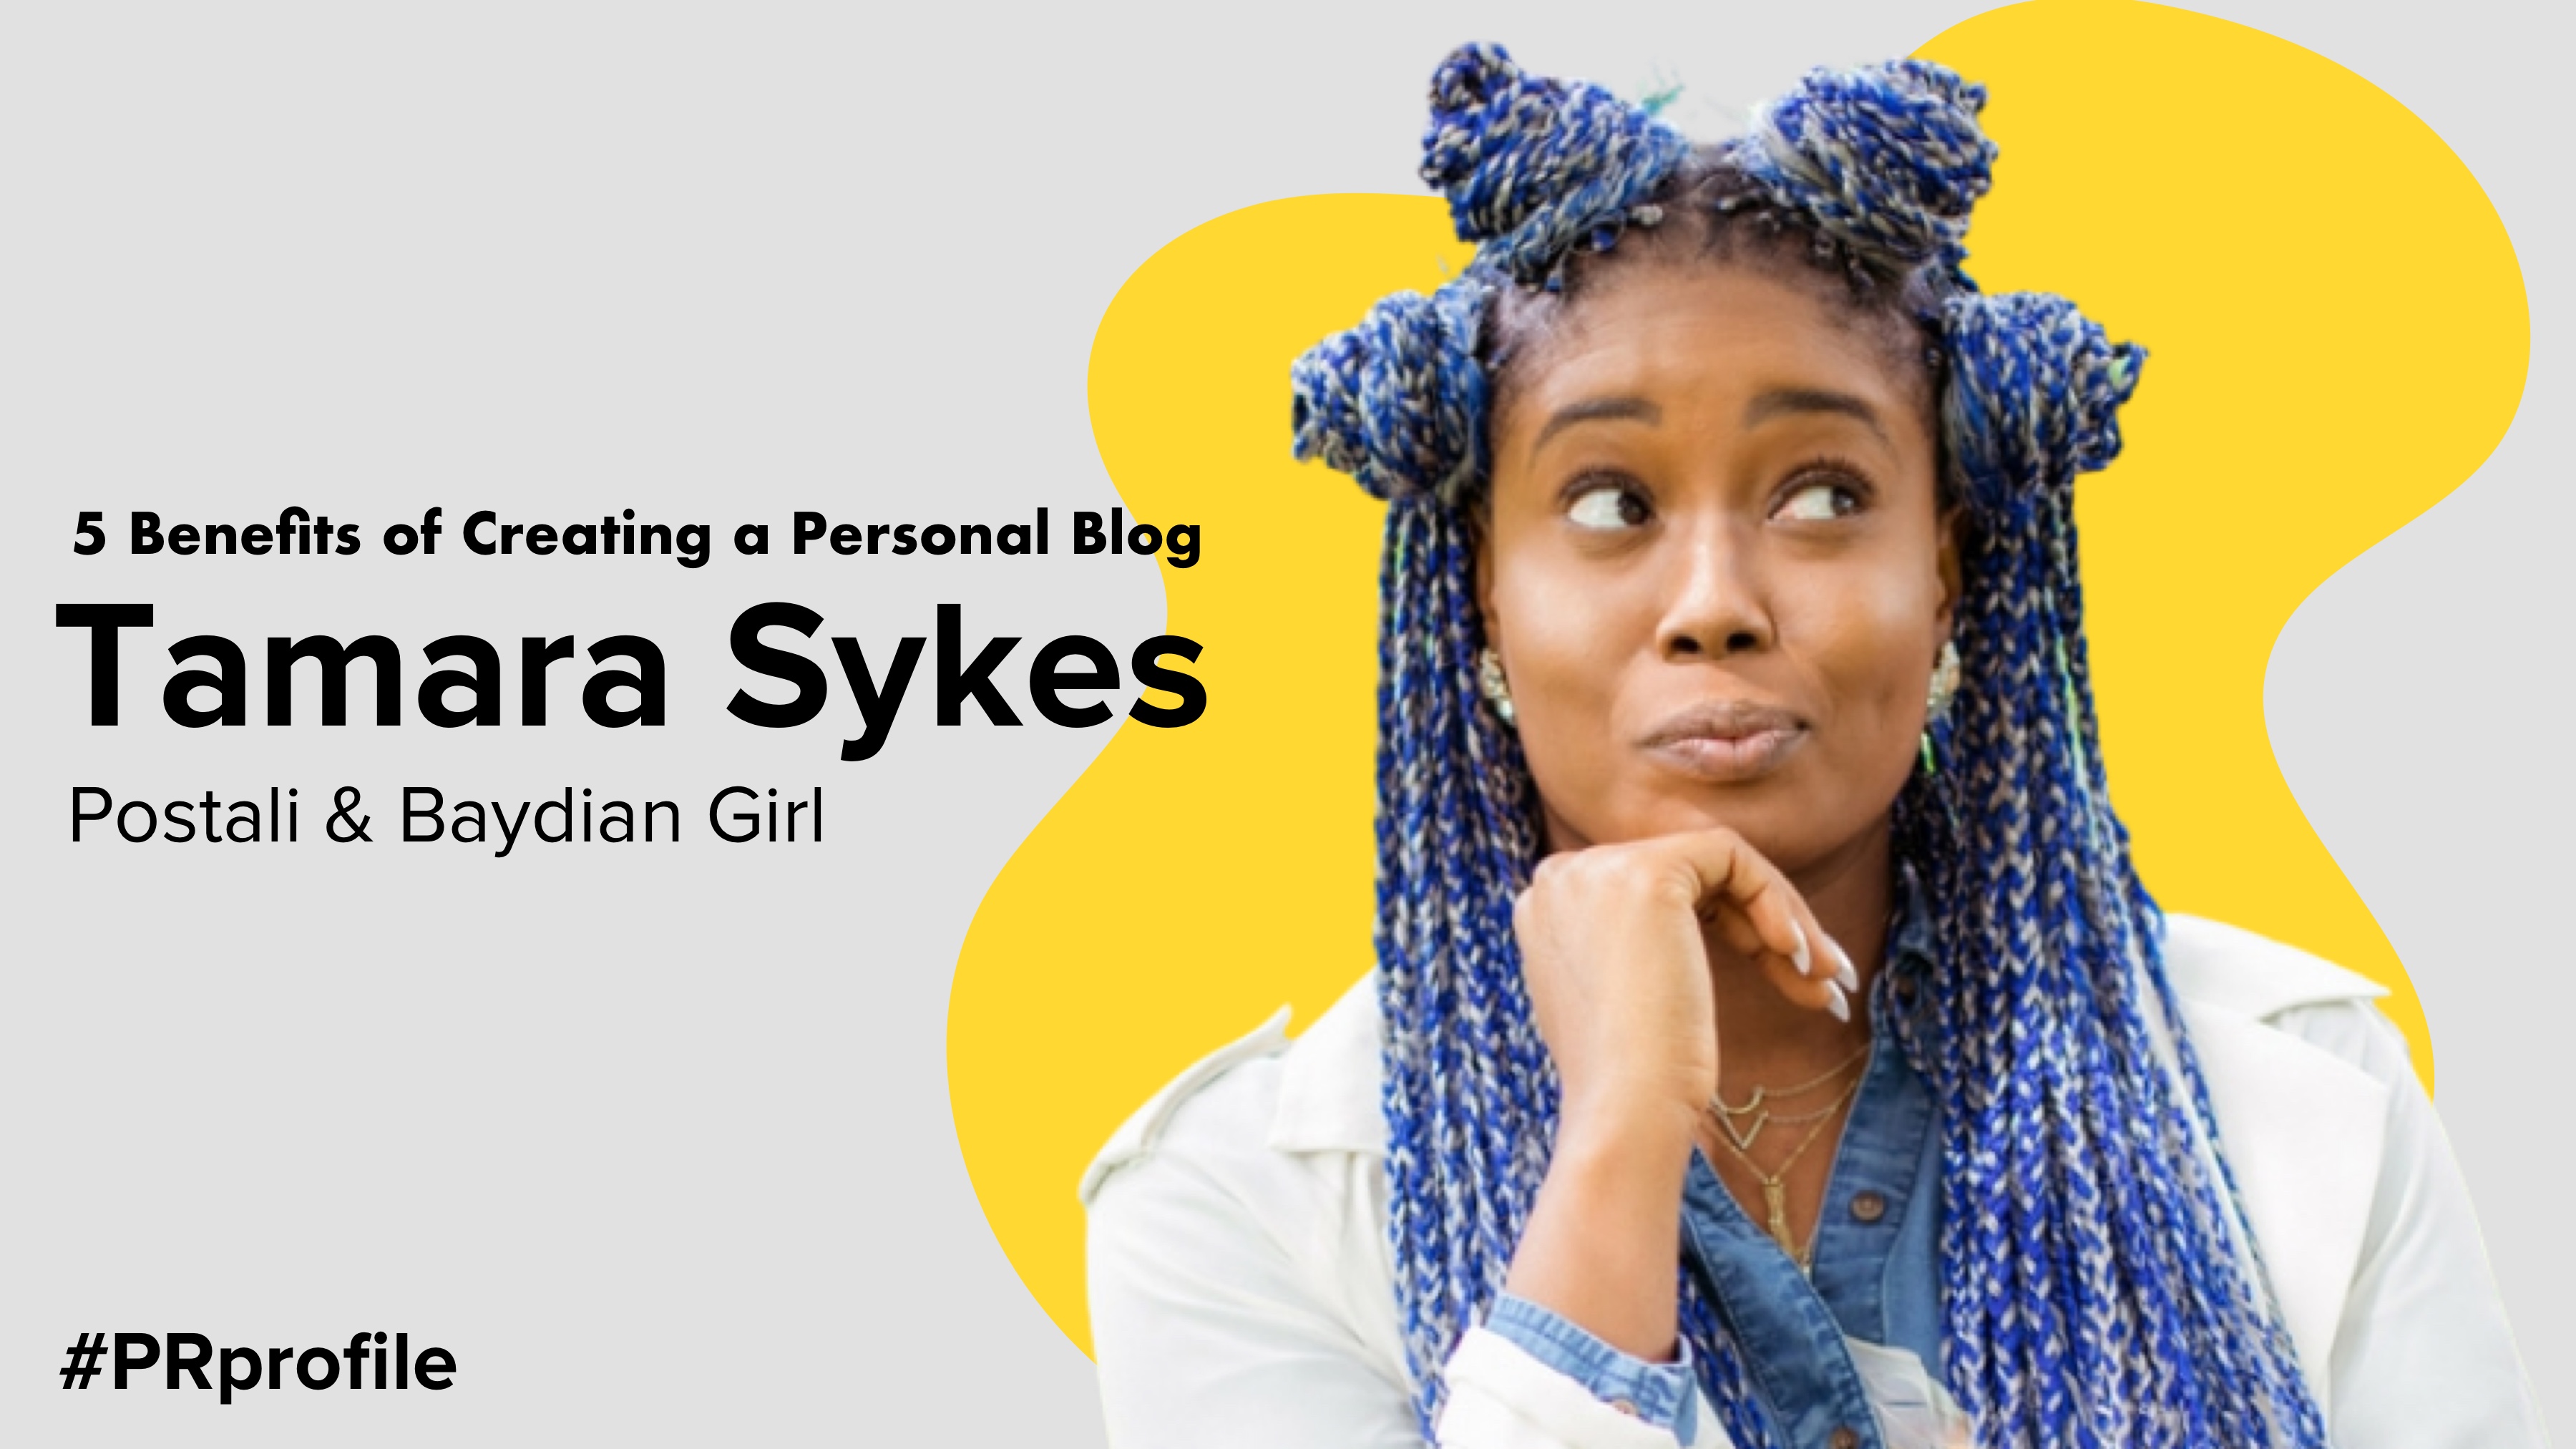 5 Benefits of Creating a Personal Blog with Tamara Sykes